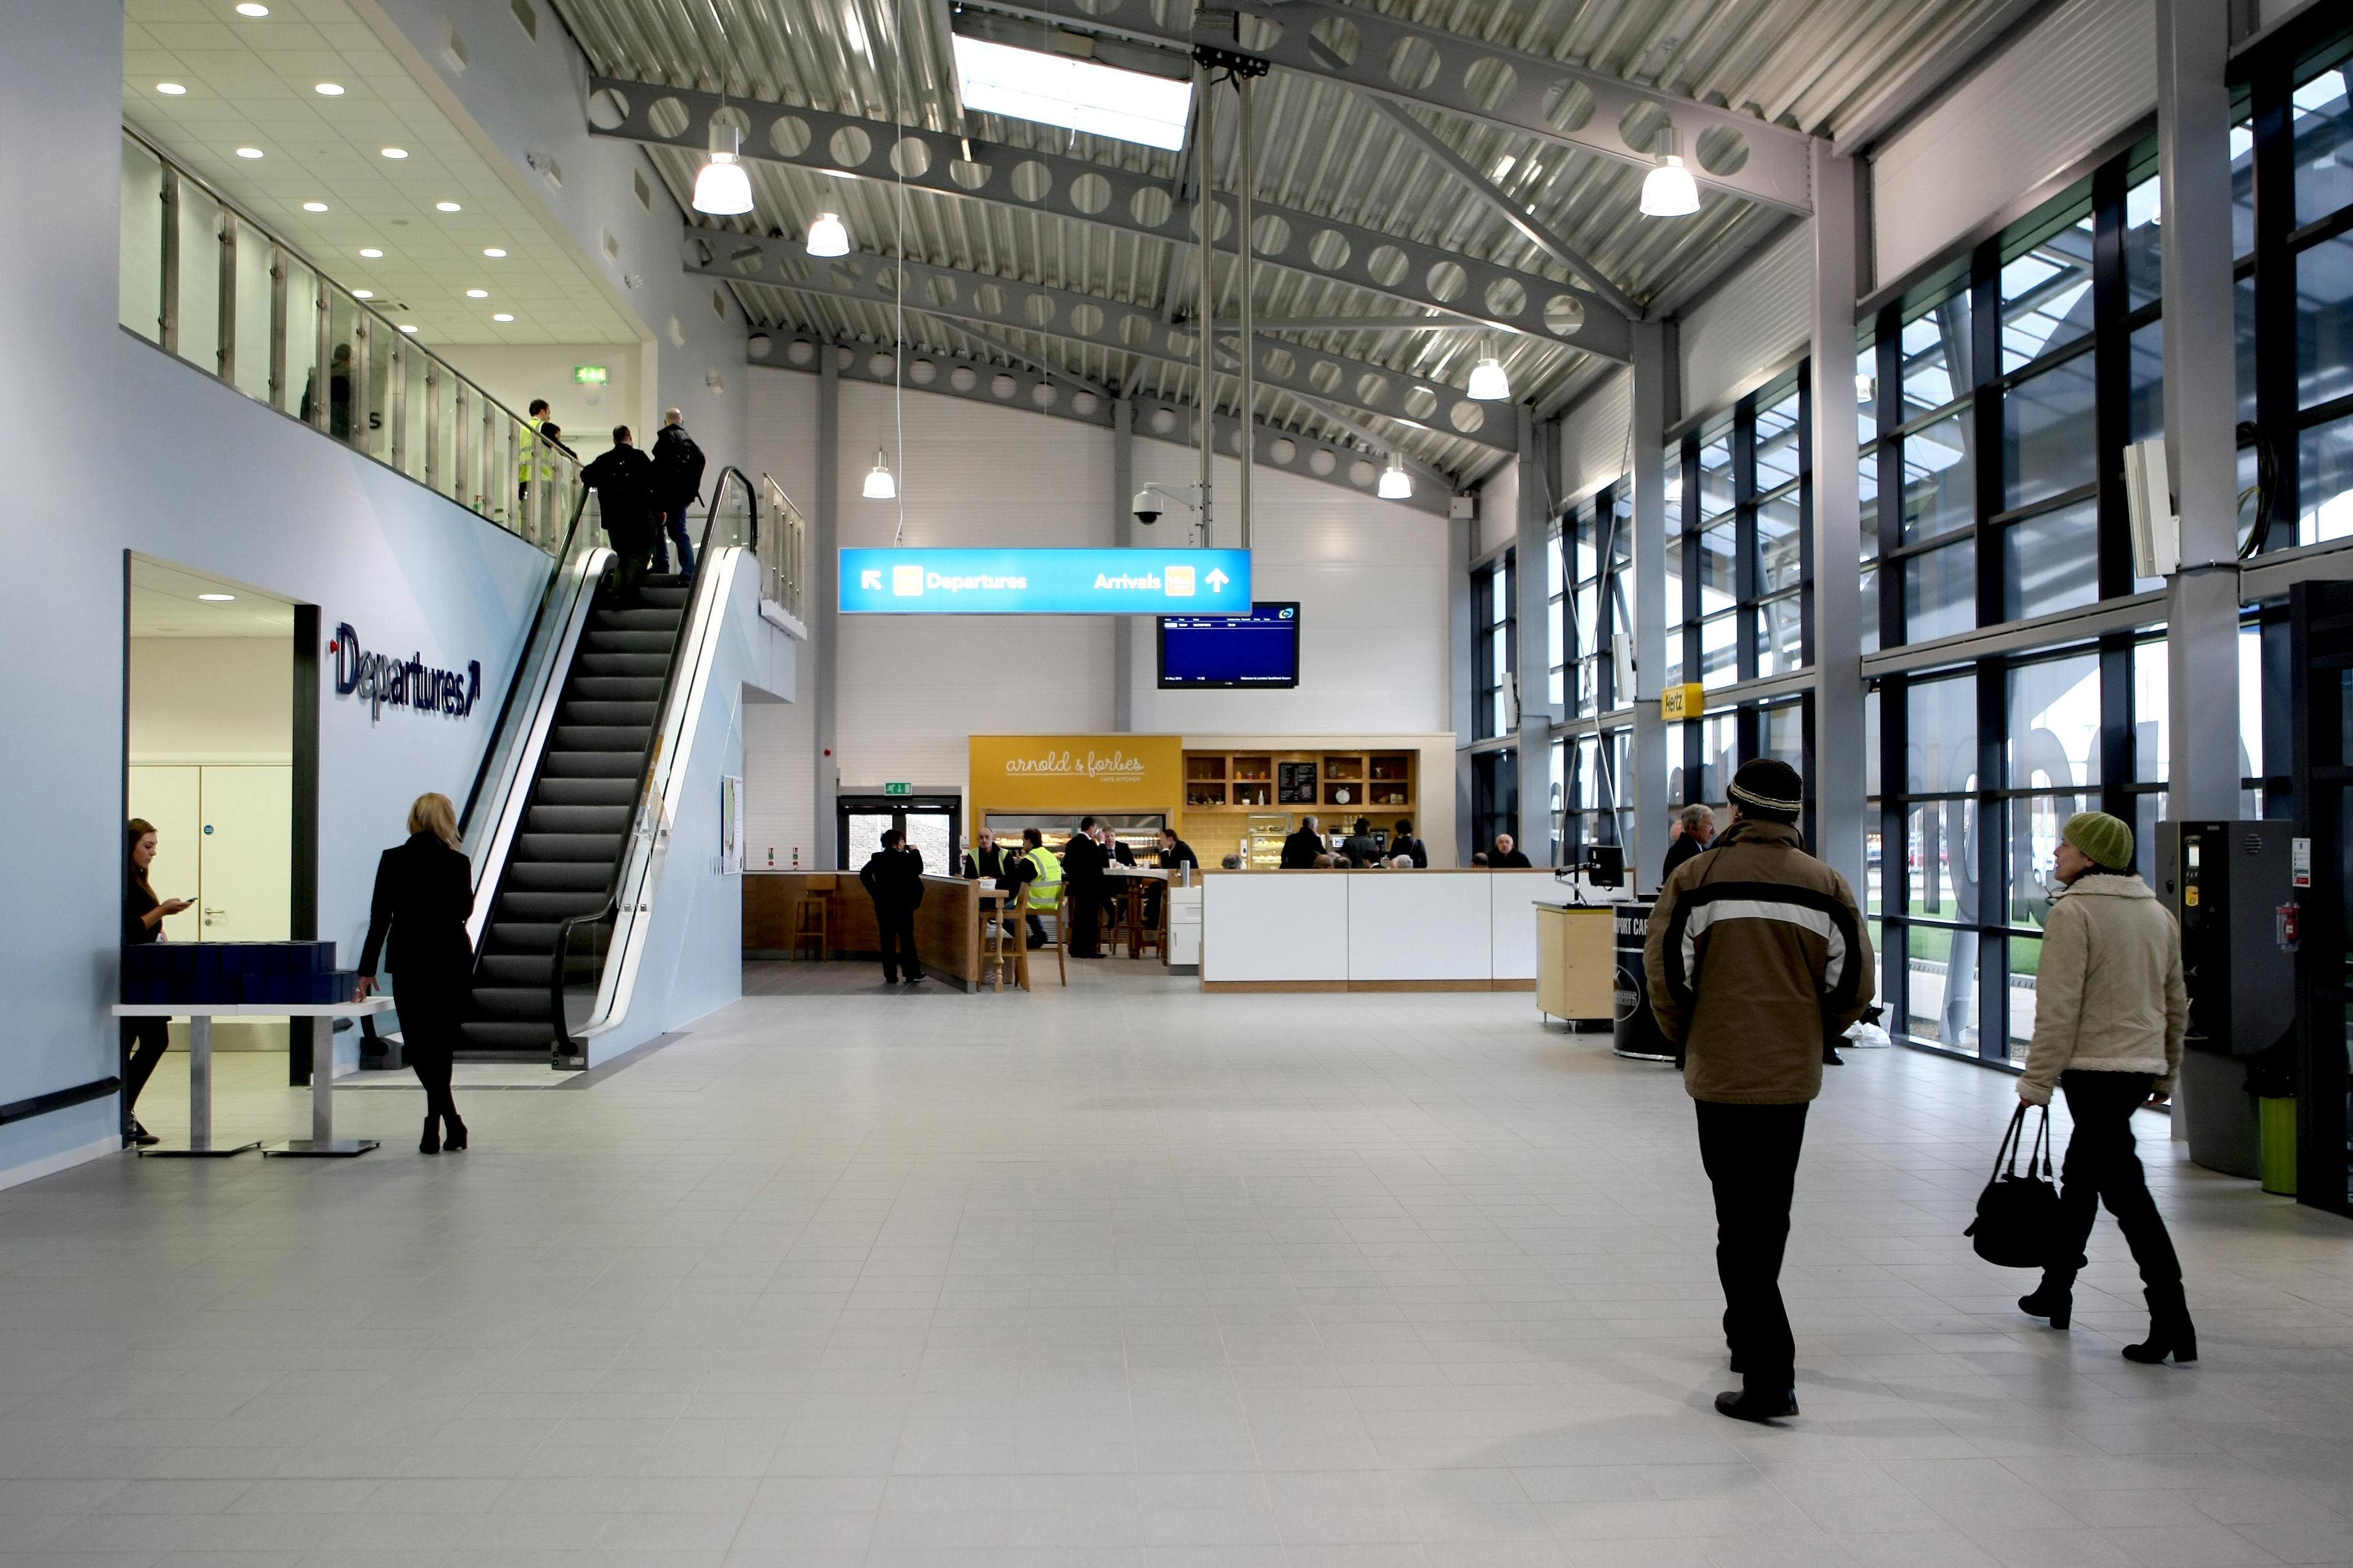 Southend Airport has struggled to bounce back after the pandemic (Chris Radburn/PA)